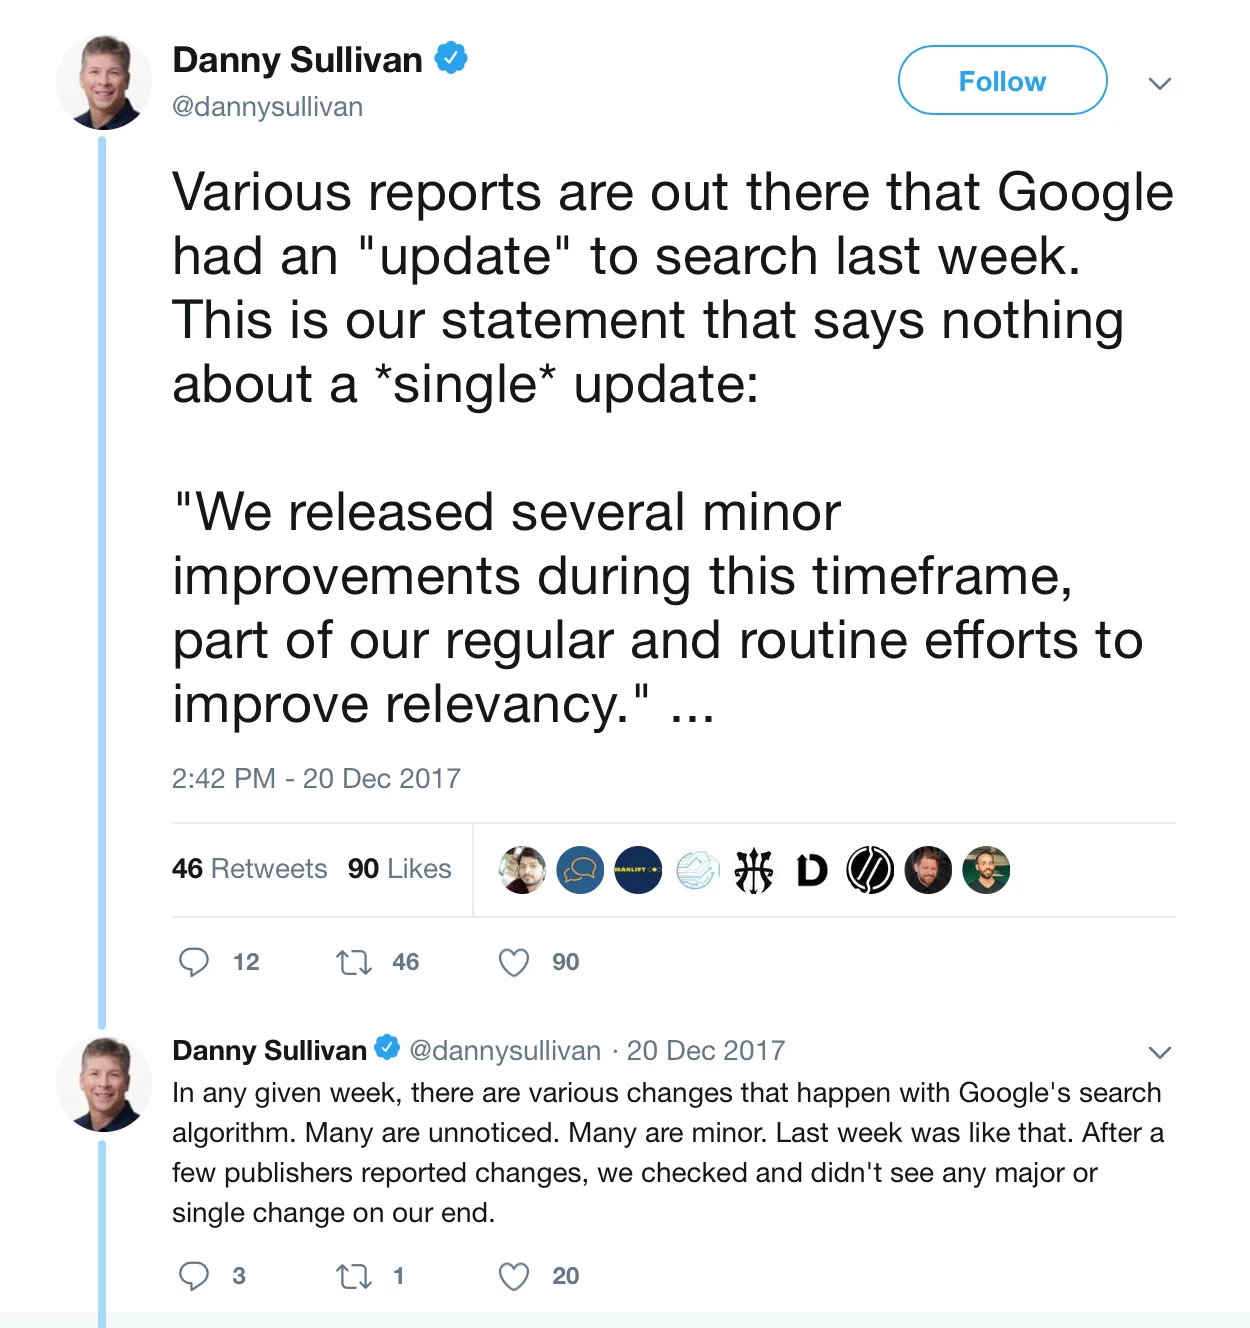 Danny Sullivan's Maccabees Tweets about how there are always multiple daily updates, no single update.